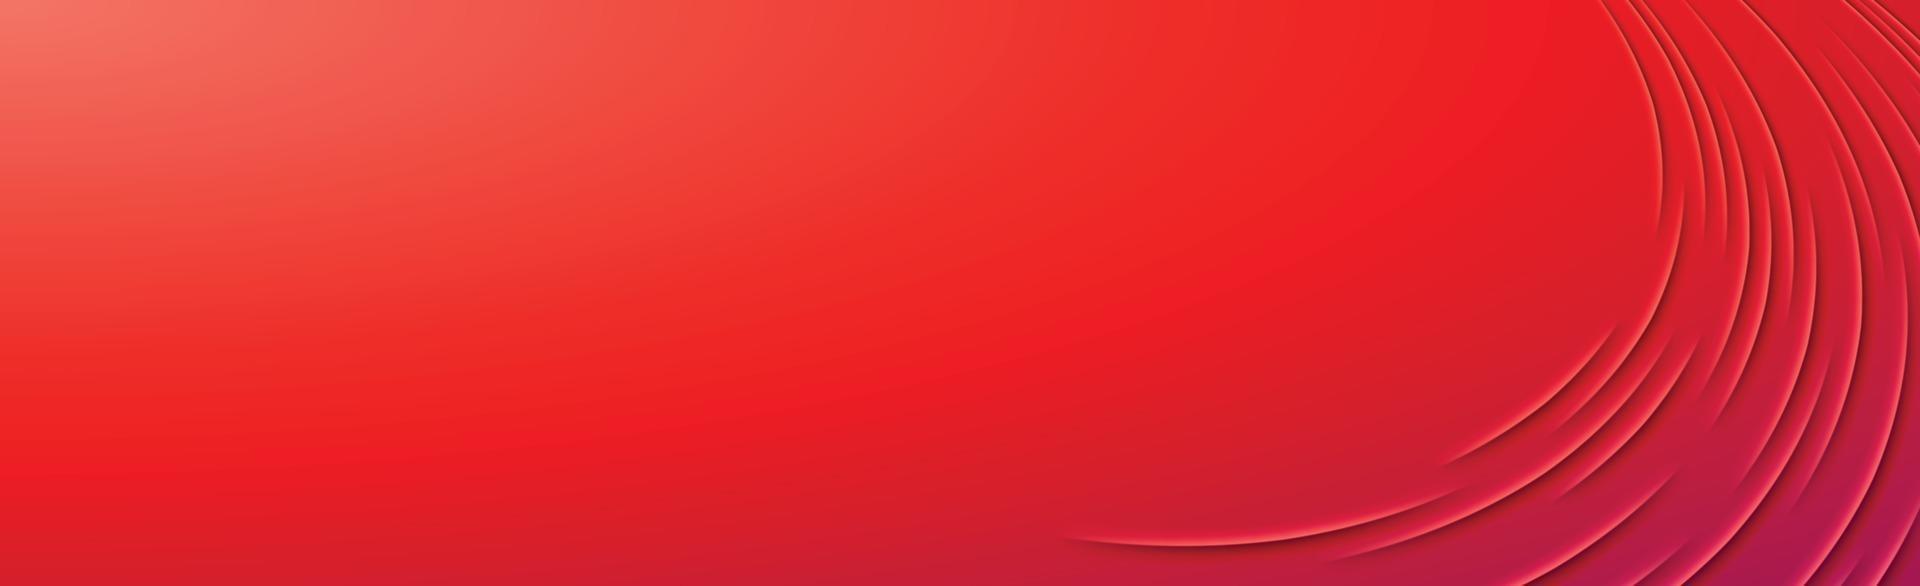 Abstract red background with cuts lines vector